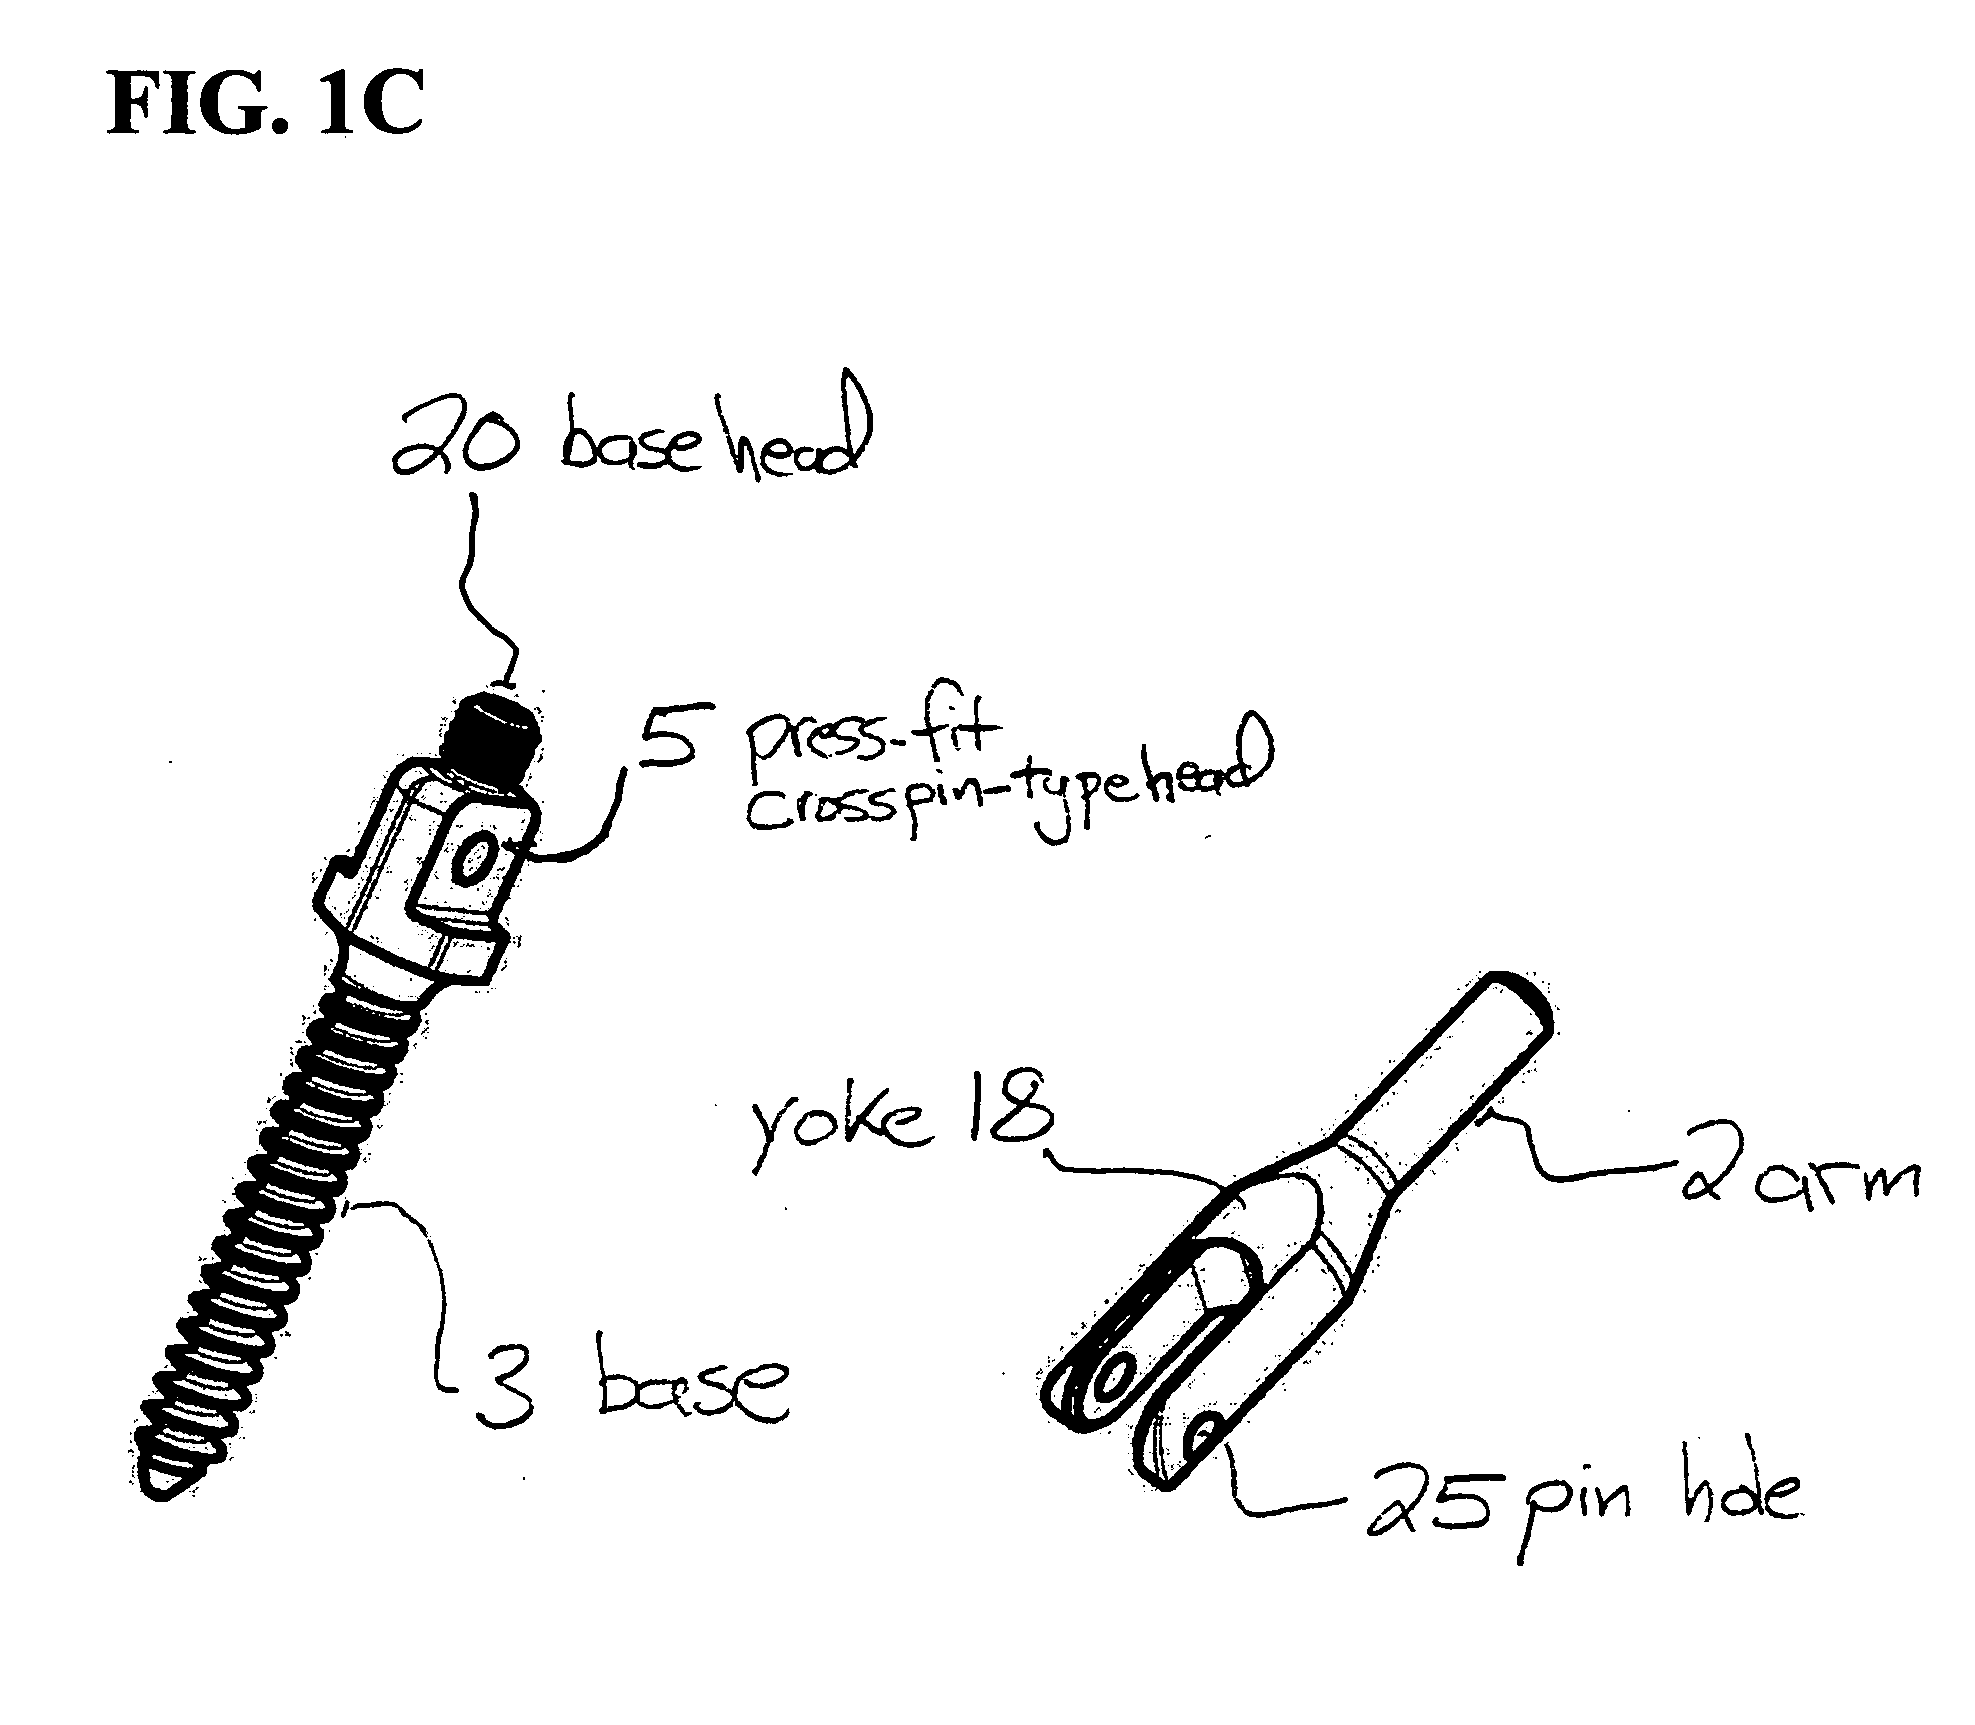 Pedicle screw assembly